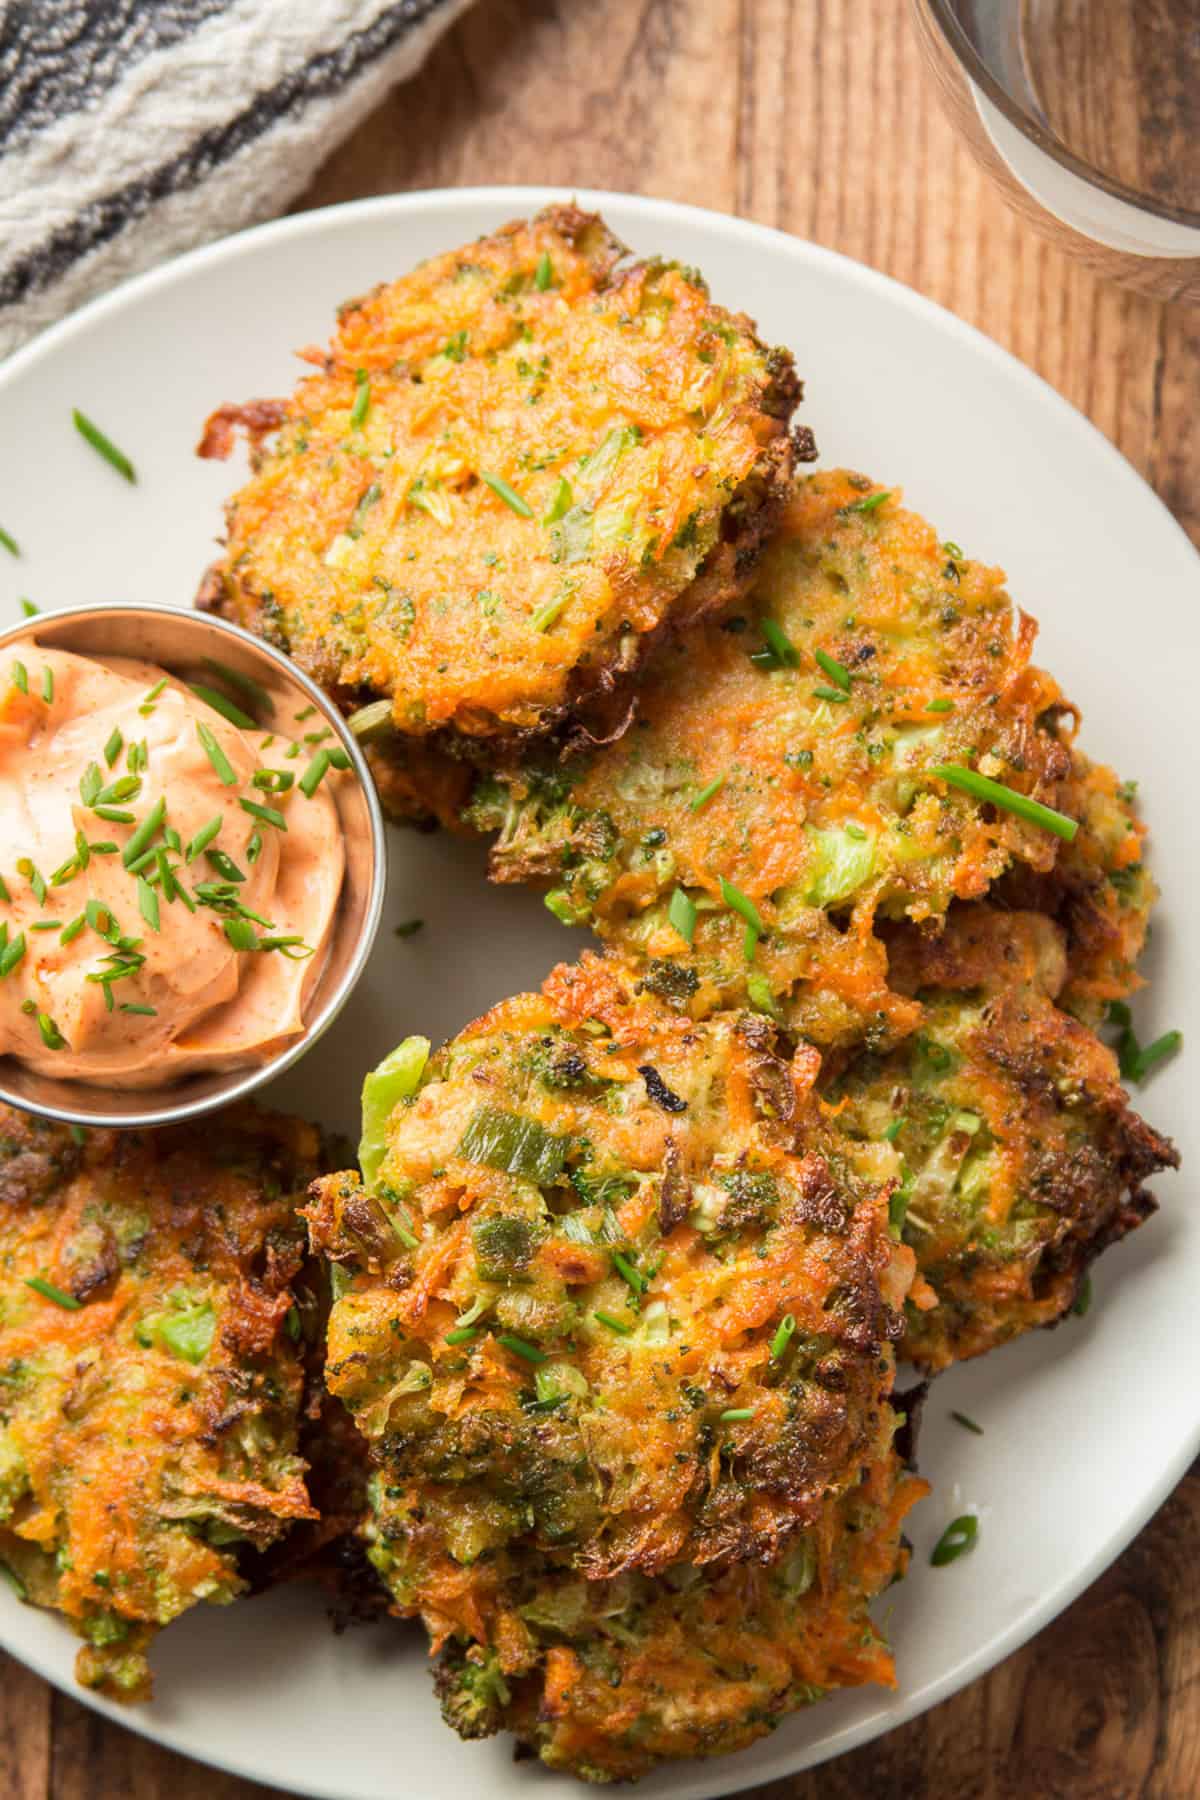 Vegetable Fritters on a plate with a dish of chipotle mayo.